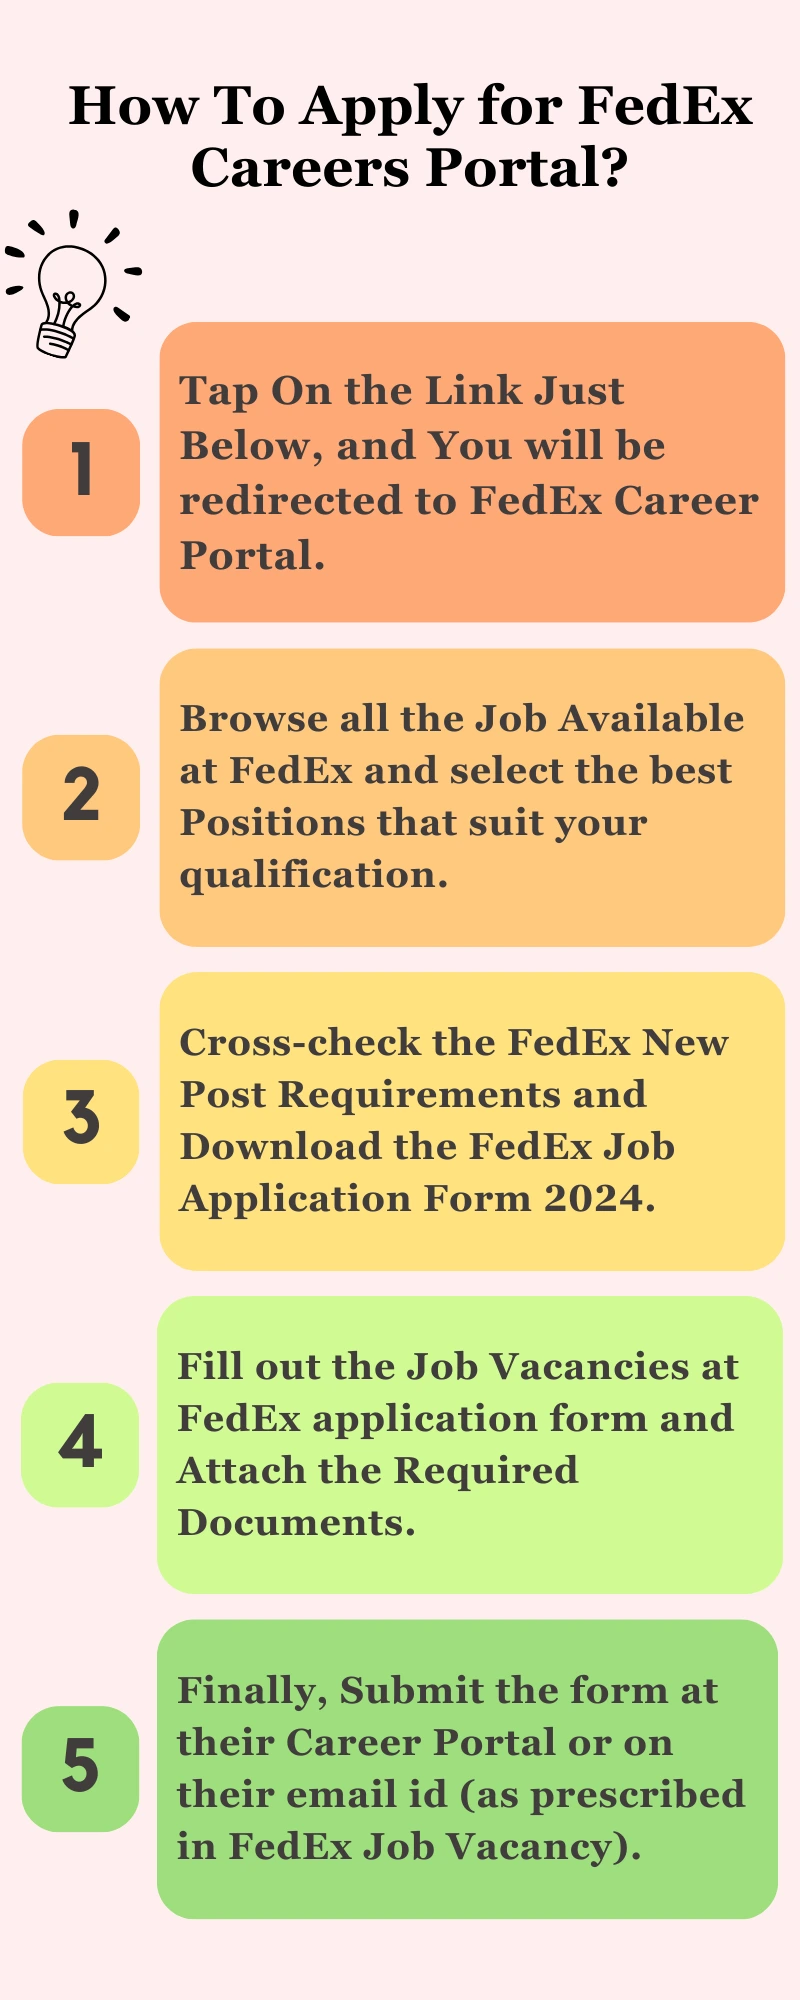 How To Apply for FedEx Careers Portal